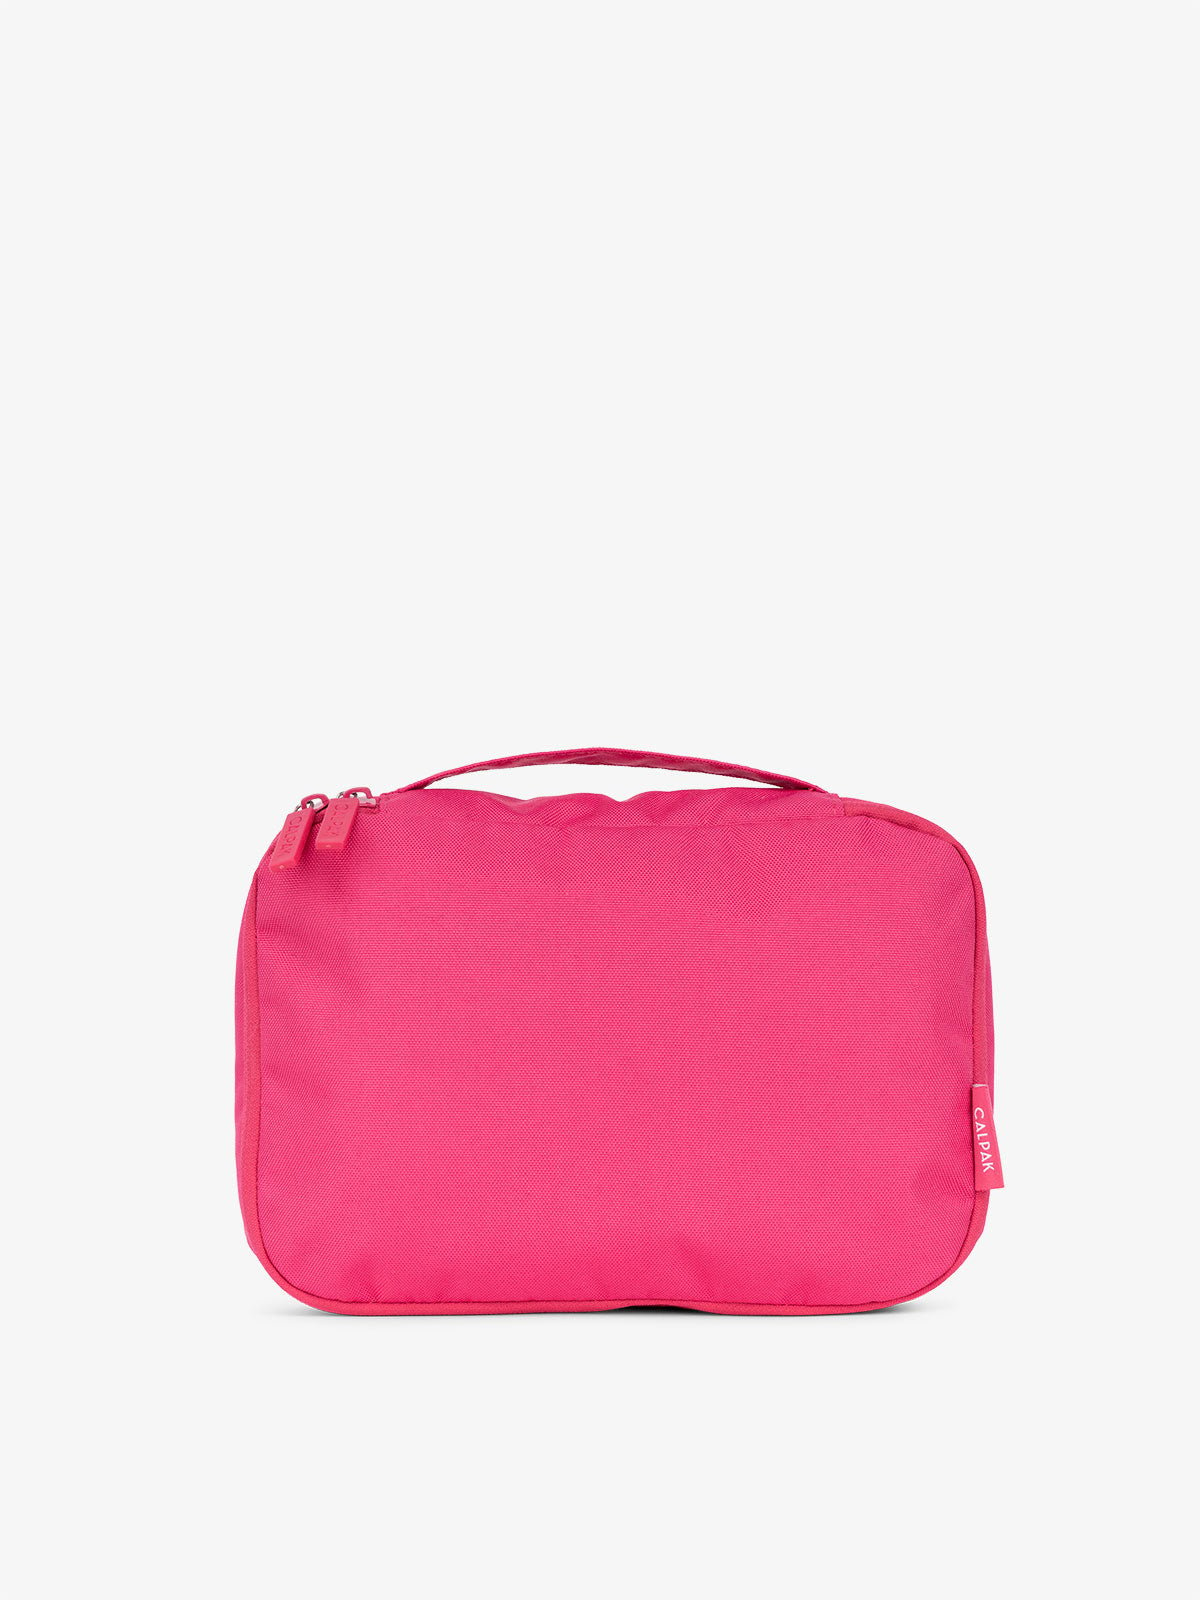 CALPAK small packing cubes with top handle in pink